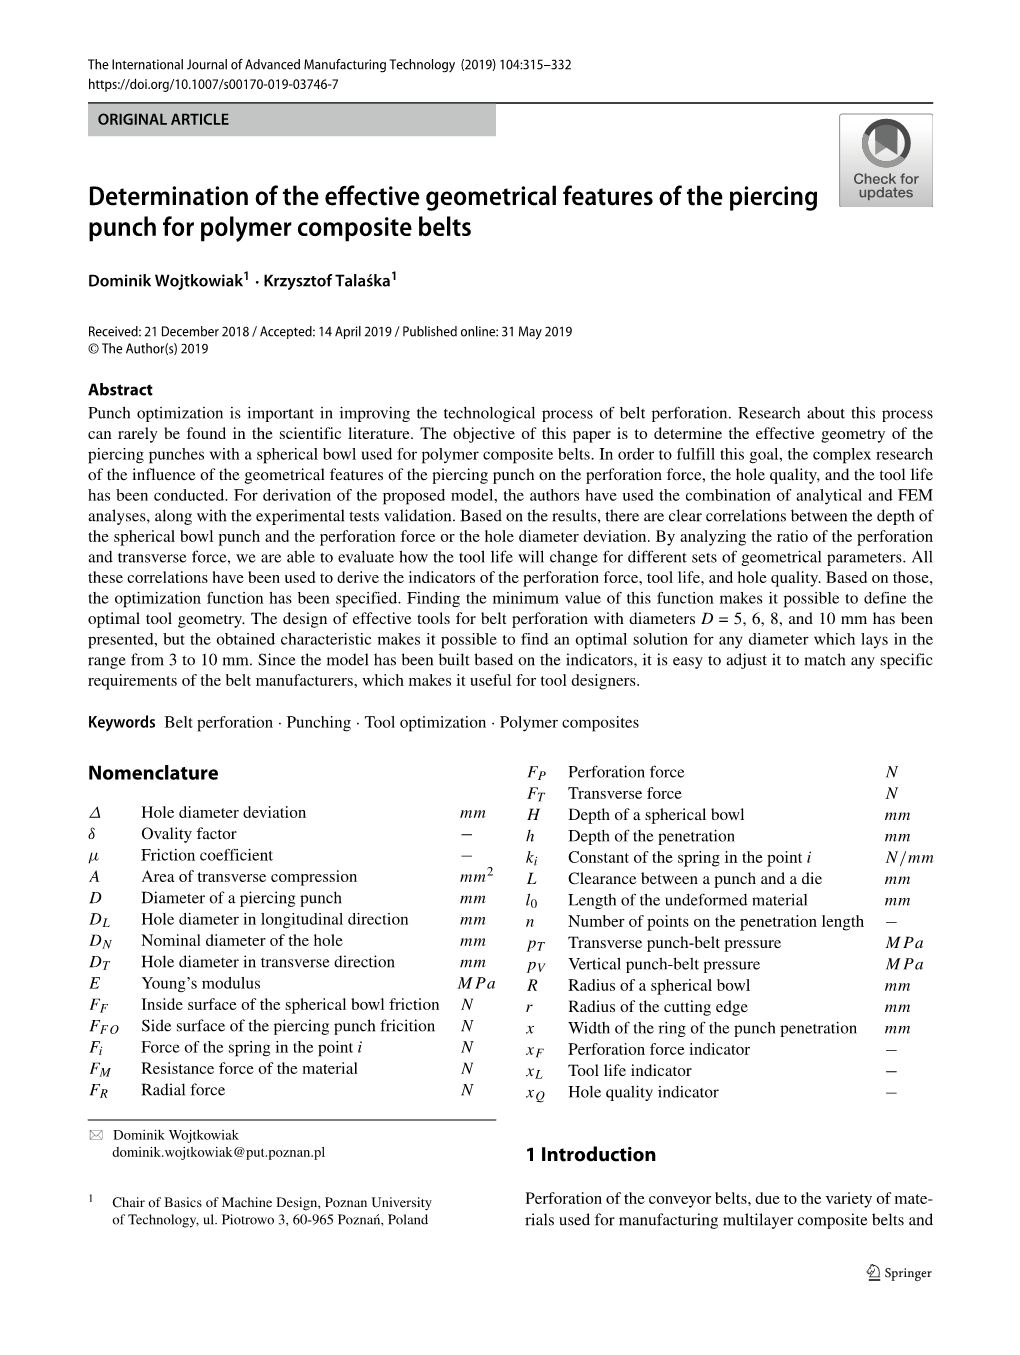 Determination of the Effective Geometrical Features of the Piercing